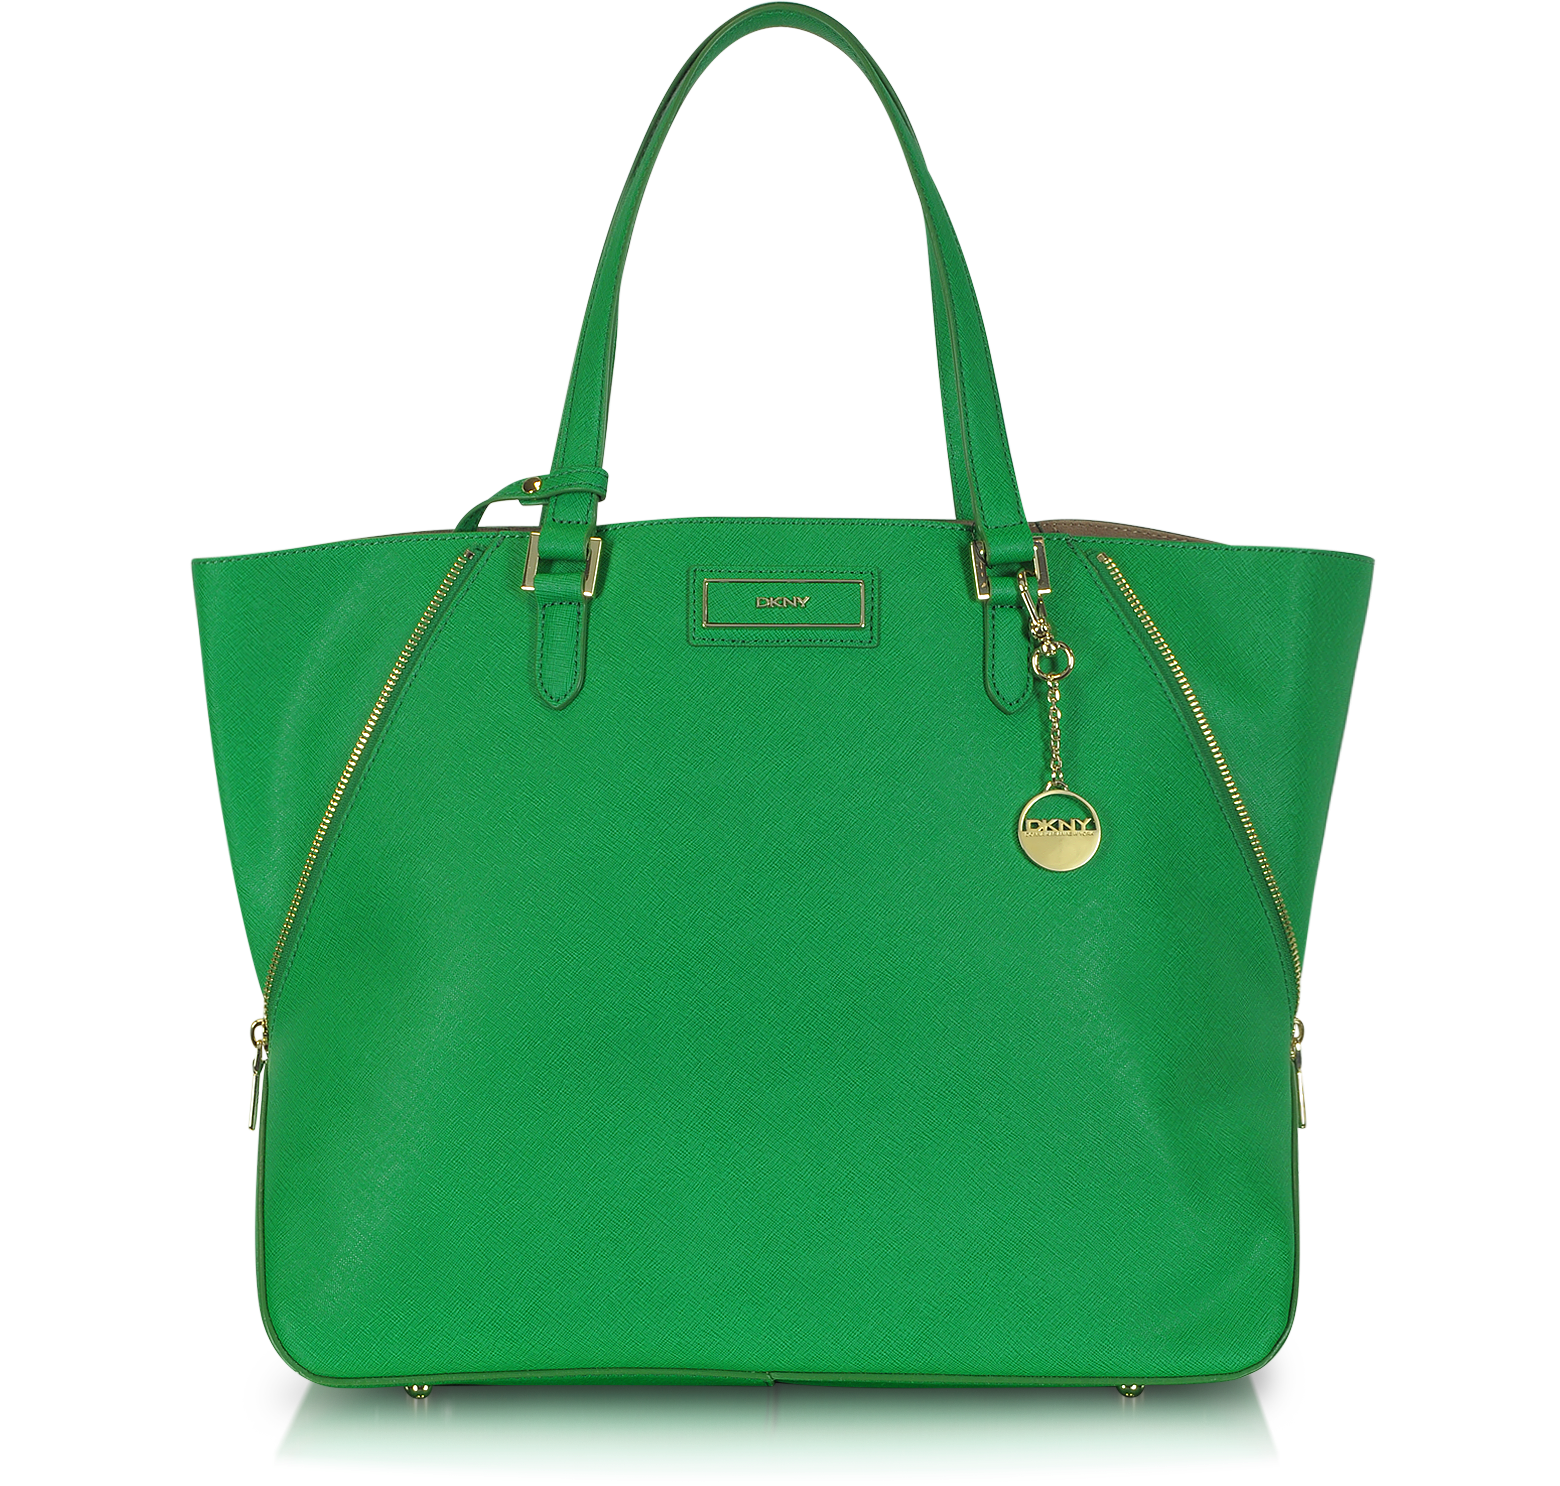 DKNY Green Large Saffiano Leather Zip Tote at FORZIERI